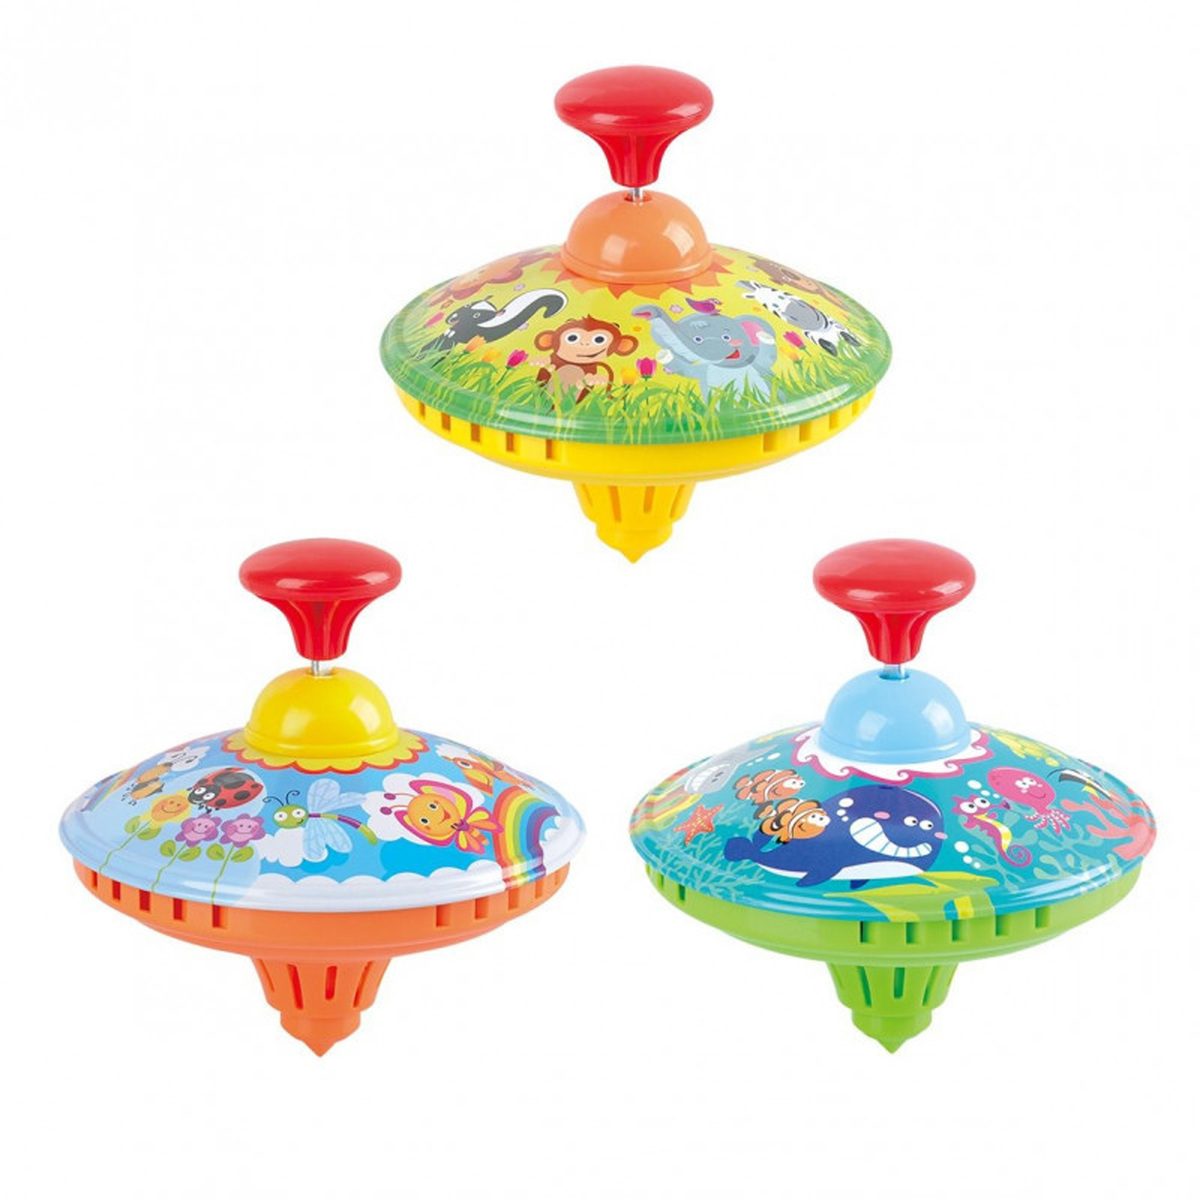 PlayGo Spinning Top, Assorted, 3 Models, 2986